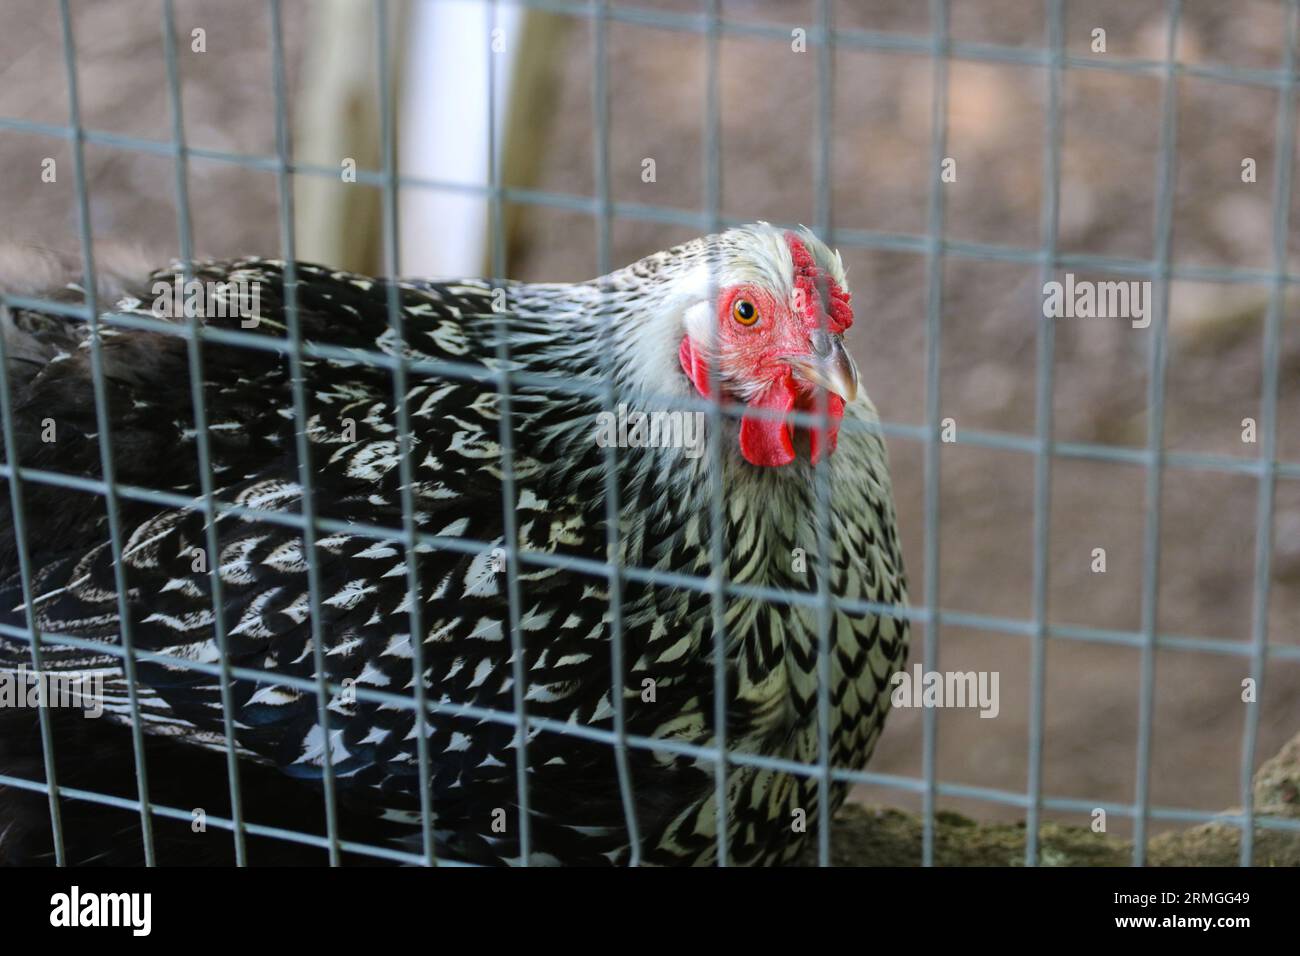 Medium close-up shot of a black laced silver wyandotte chicken peeking though a fence. Shallow depth of field Stock Photo